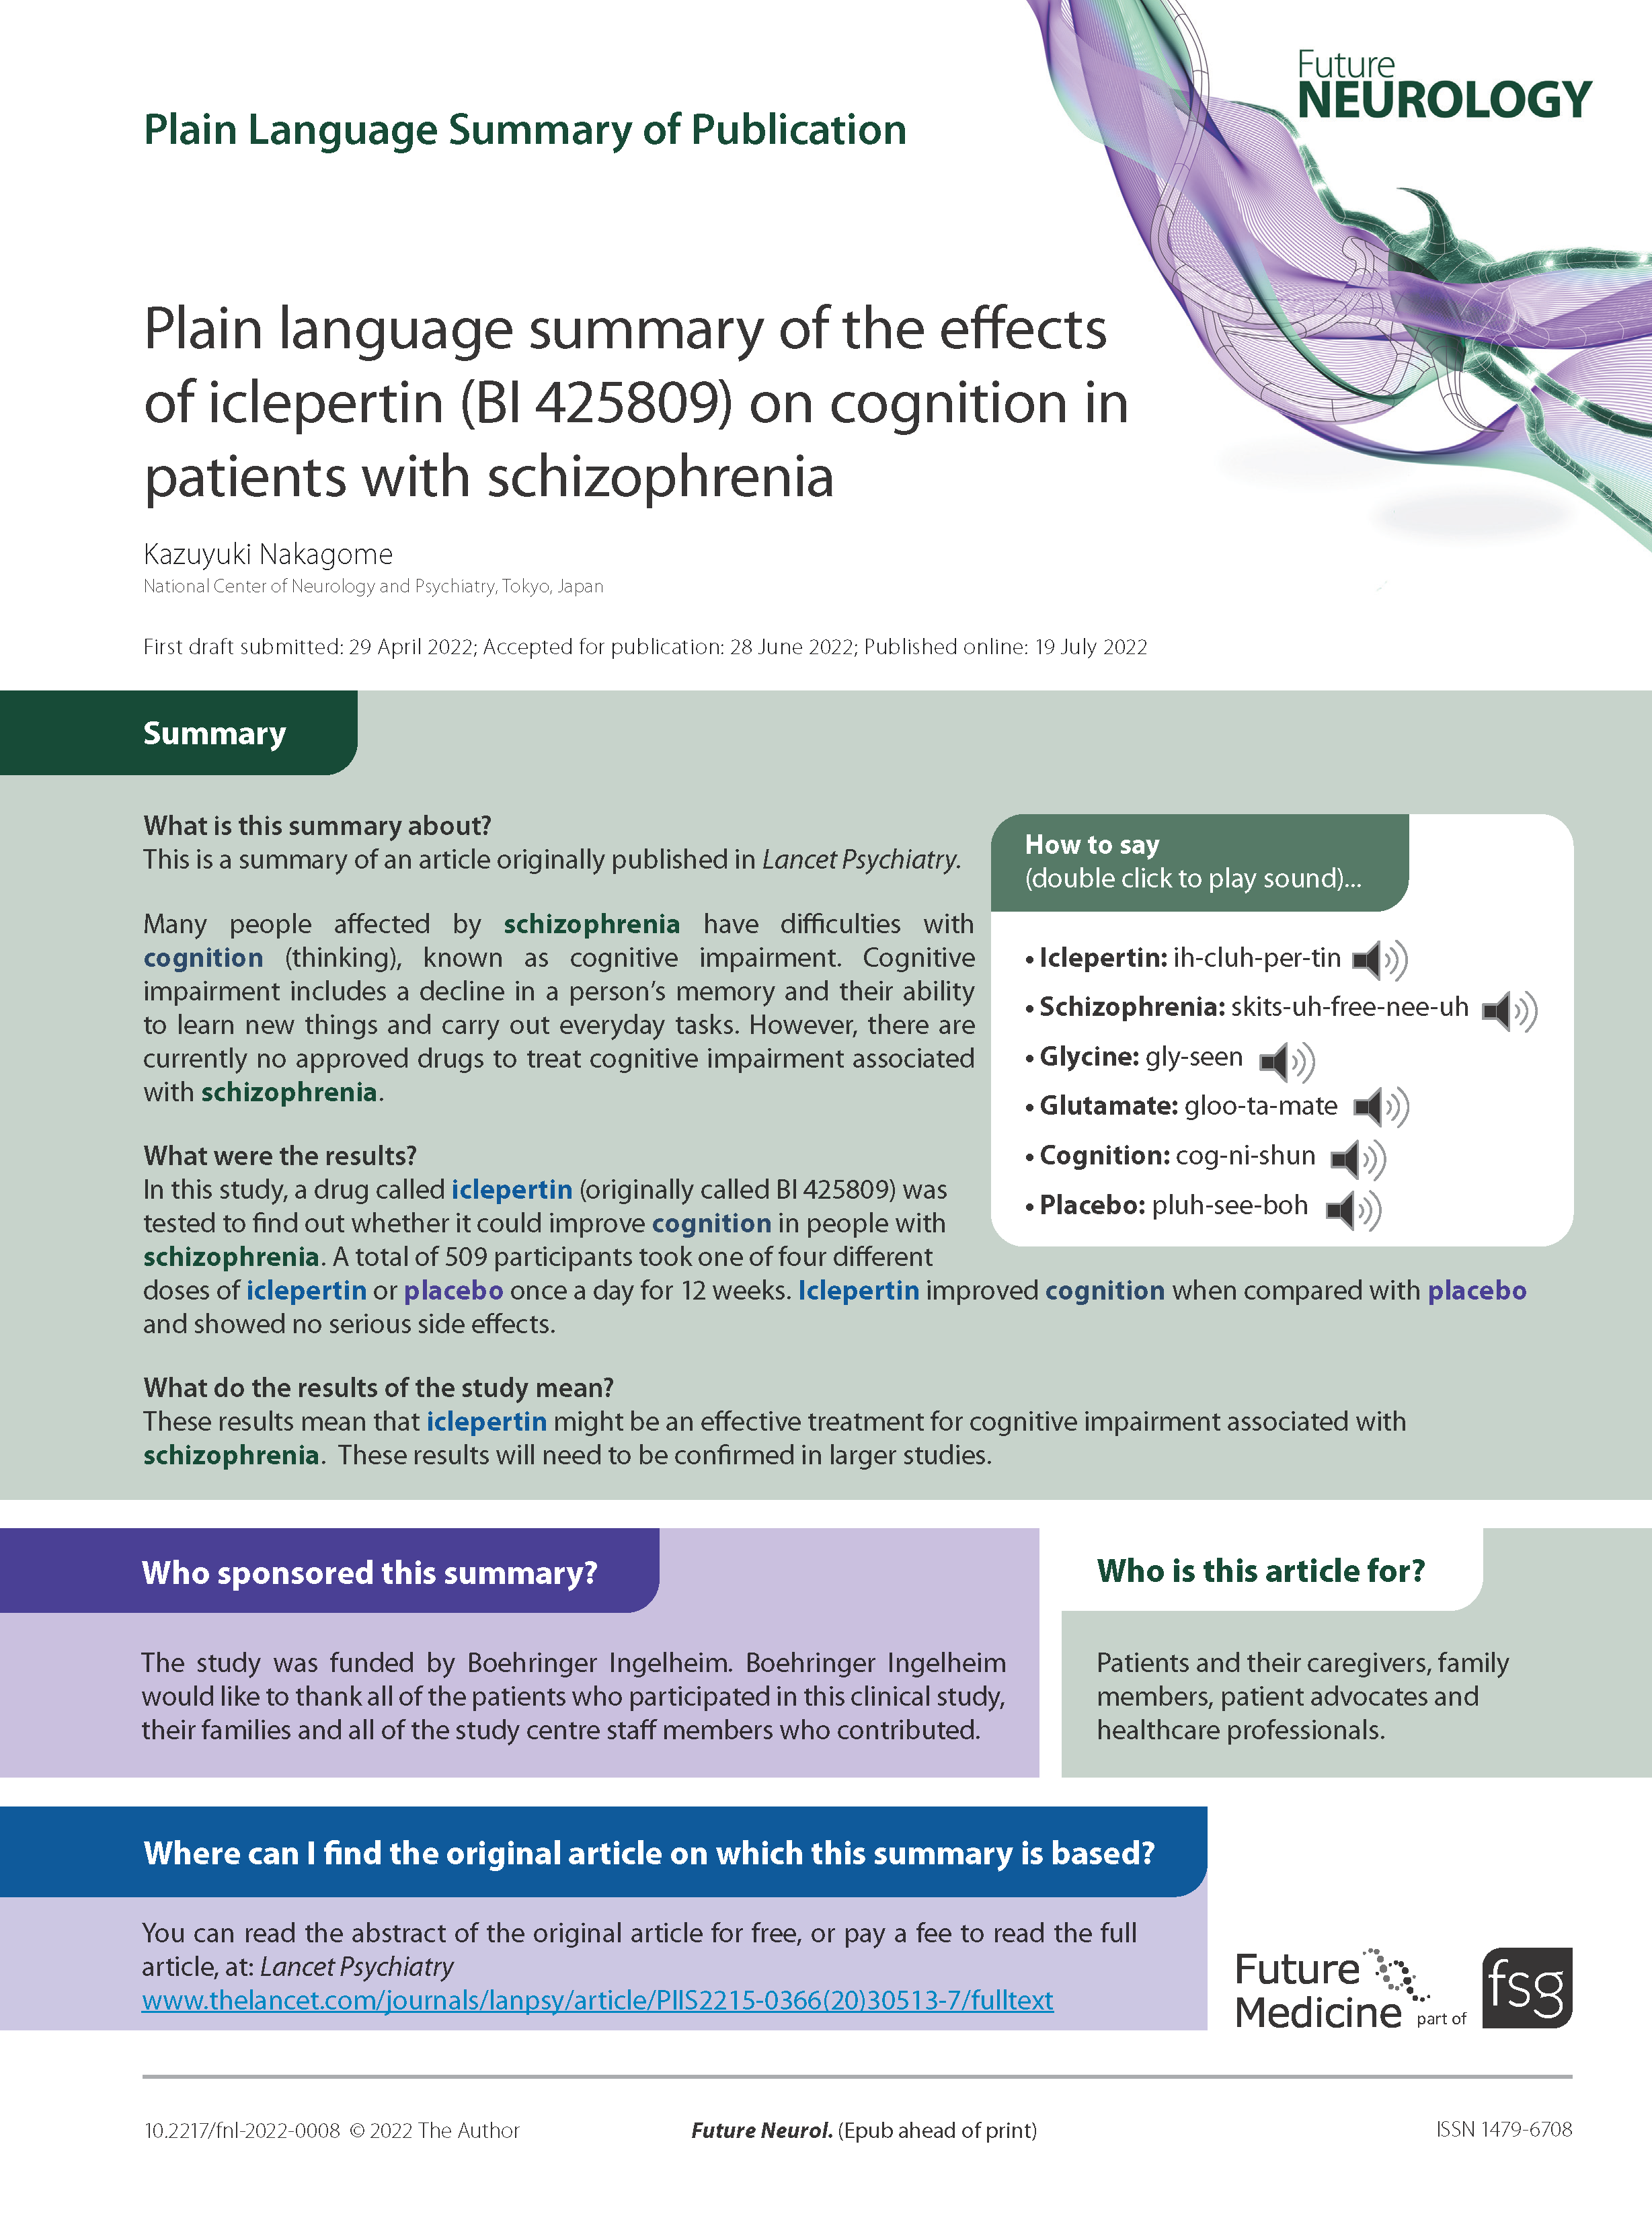 Plain language summary of the effects of iclepertin (BI 425809) on cognition in patients with schizophrenia